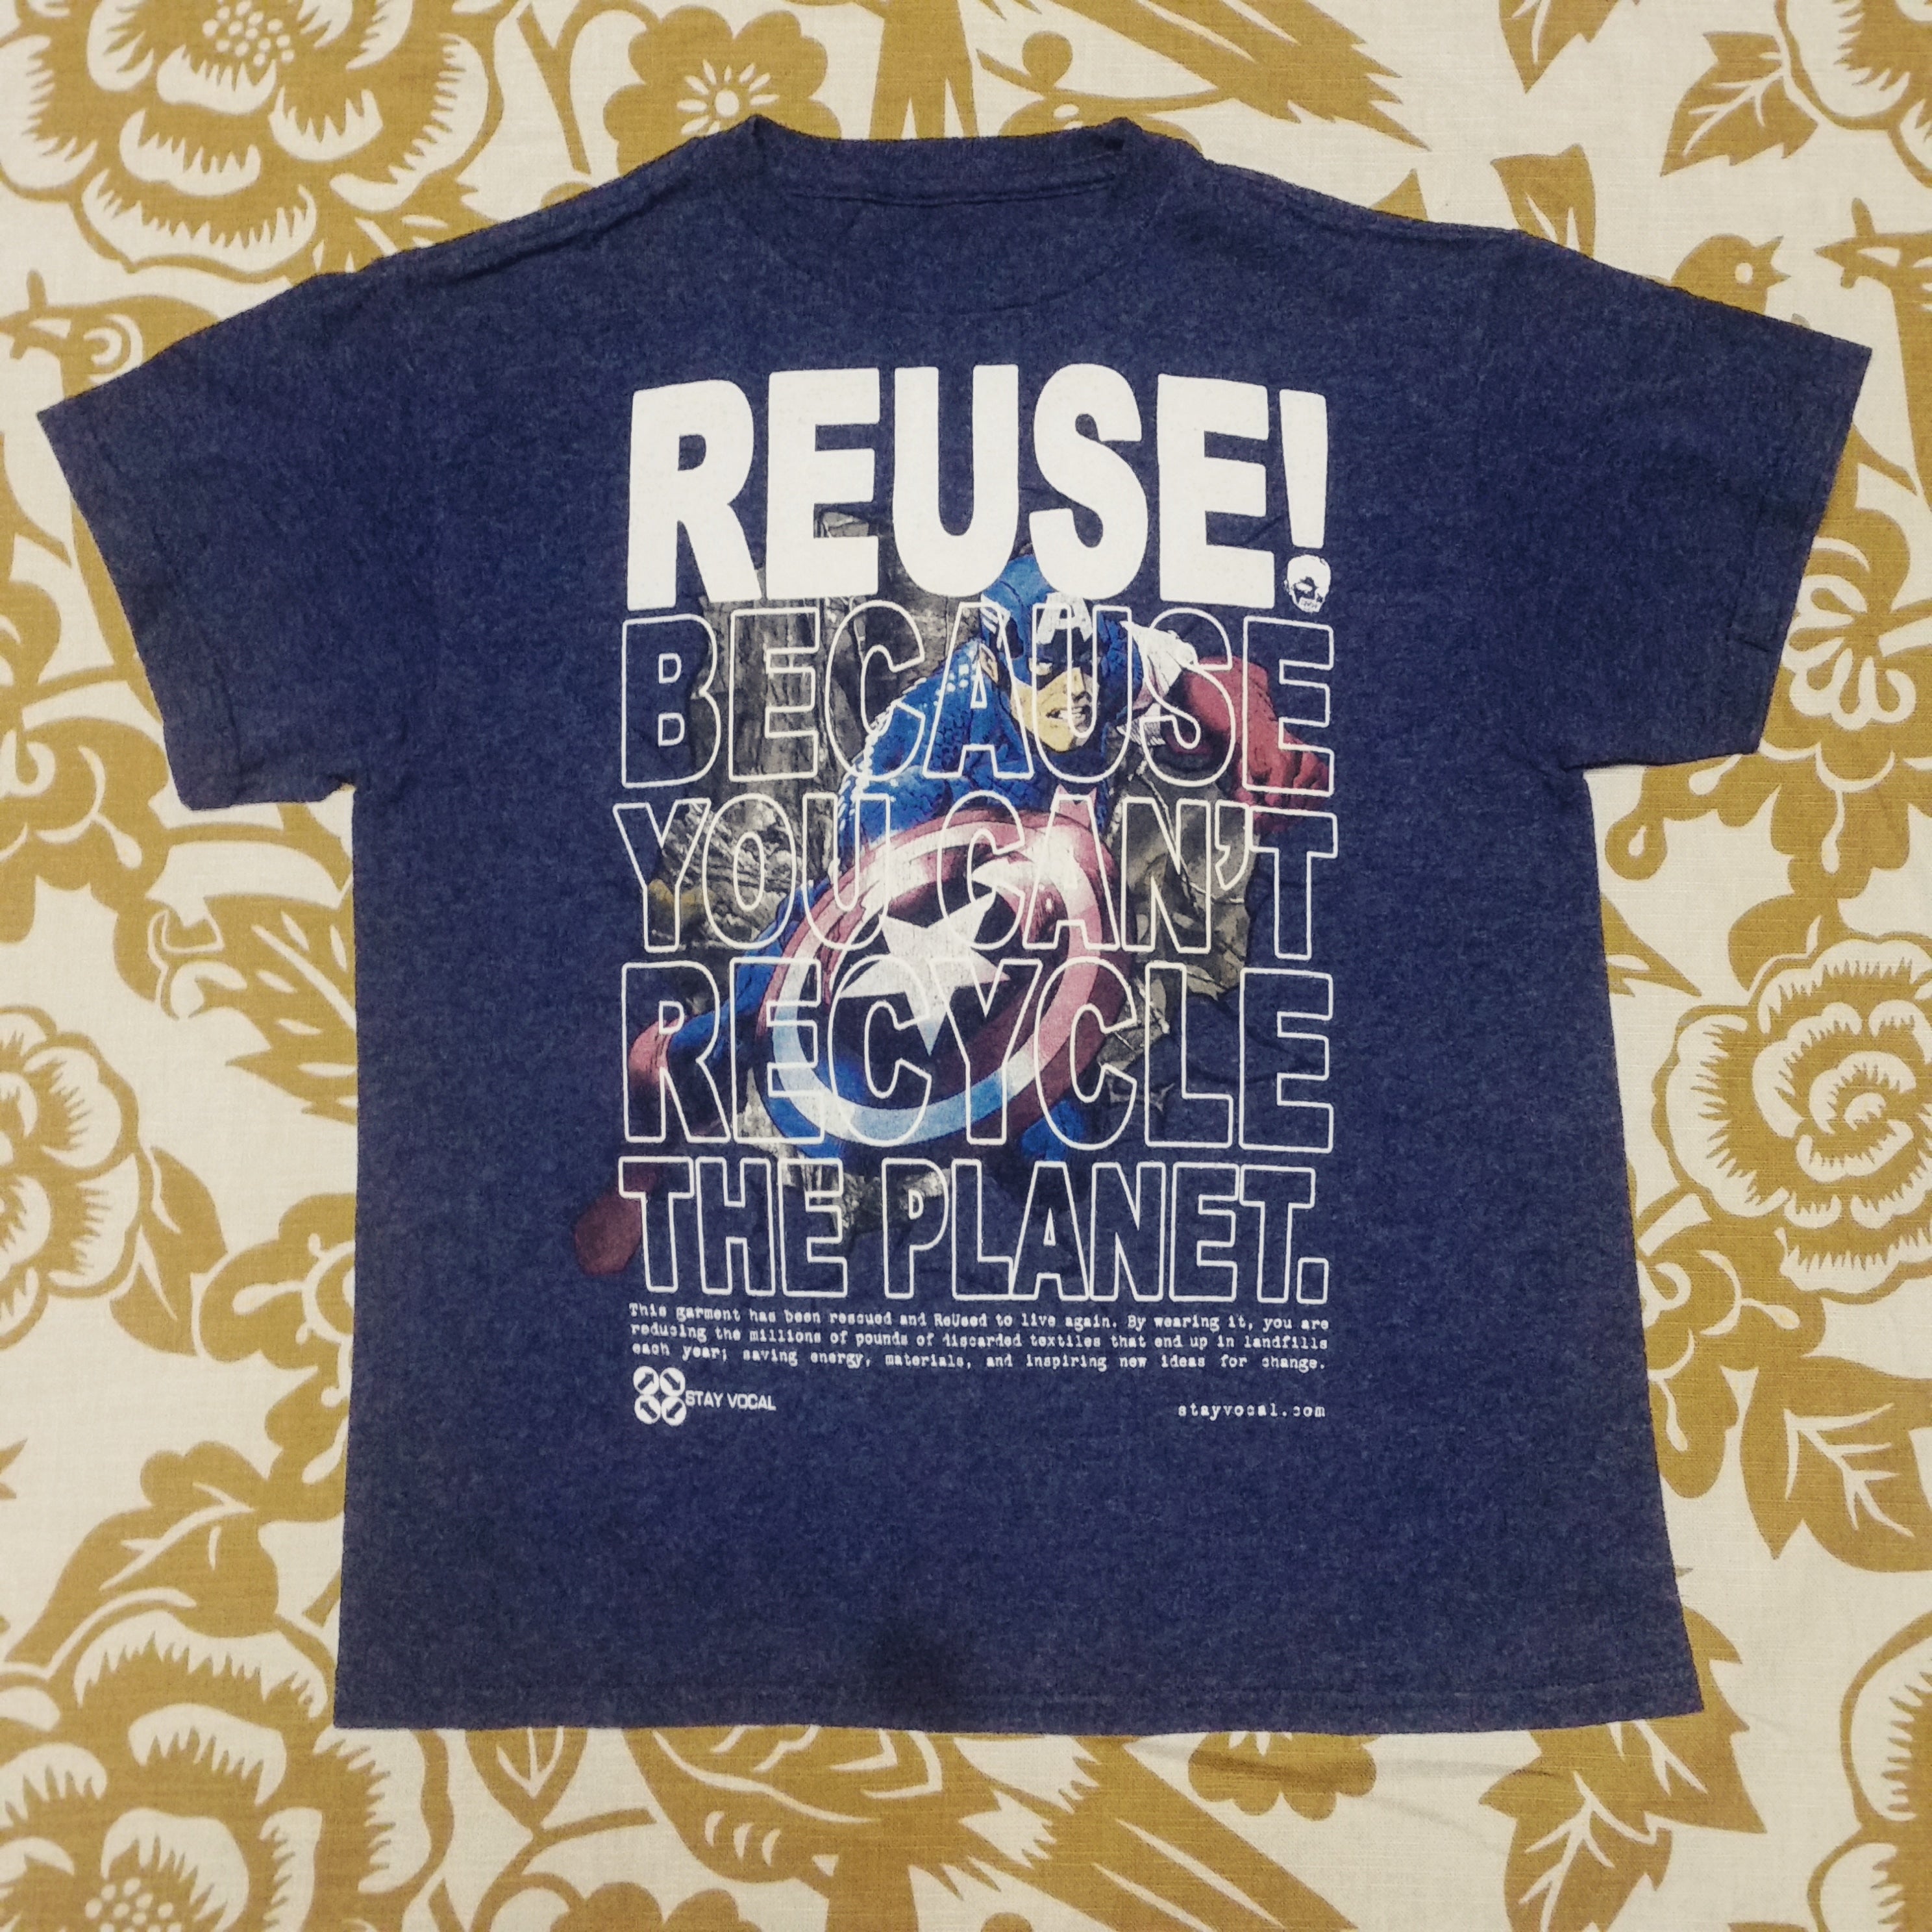 One of a Kind (Kid's M) REUSE! Captain America T-Shirt